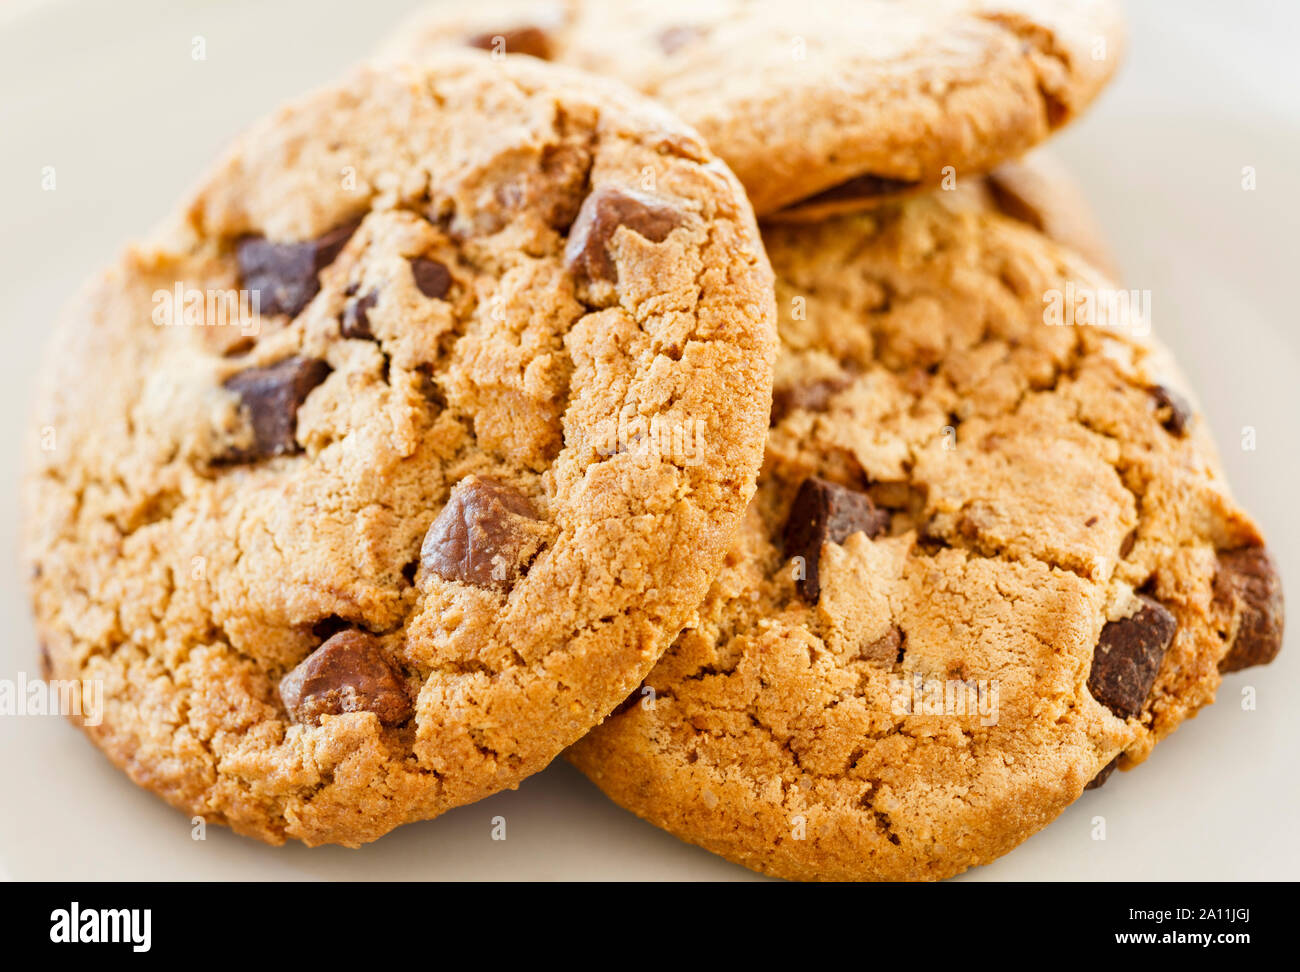 Chocolate chip cookies, close up Stock Photo